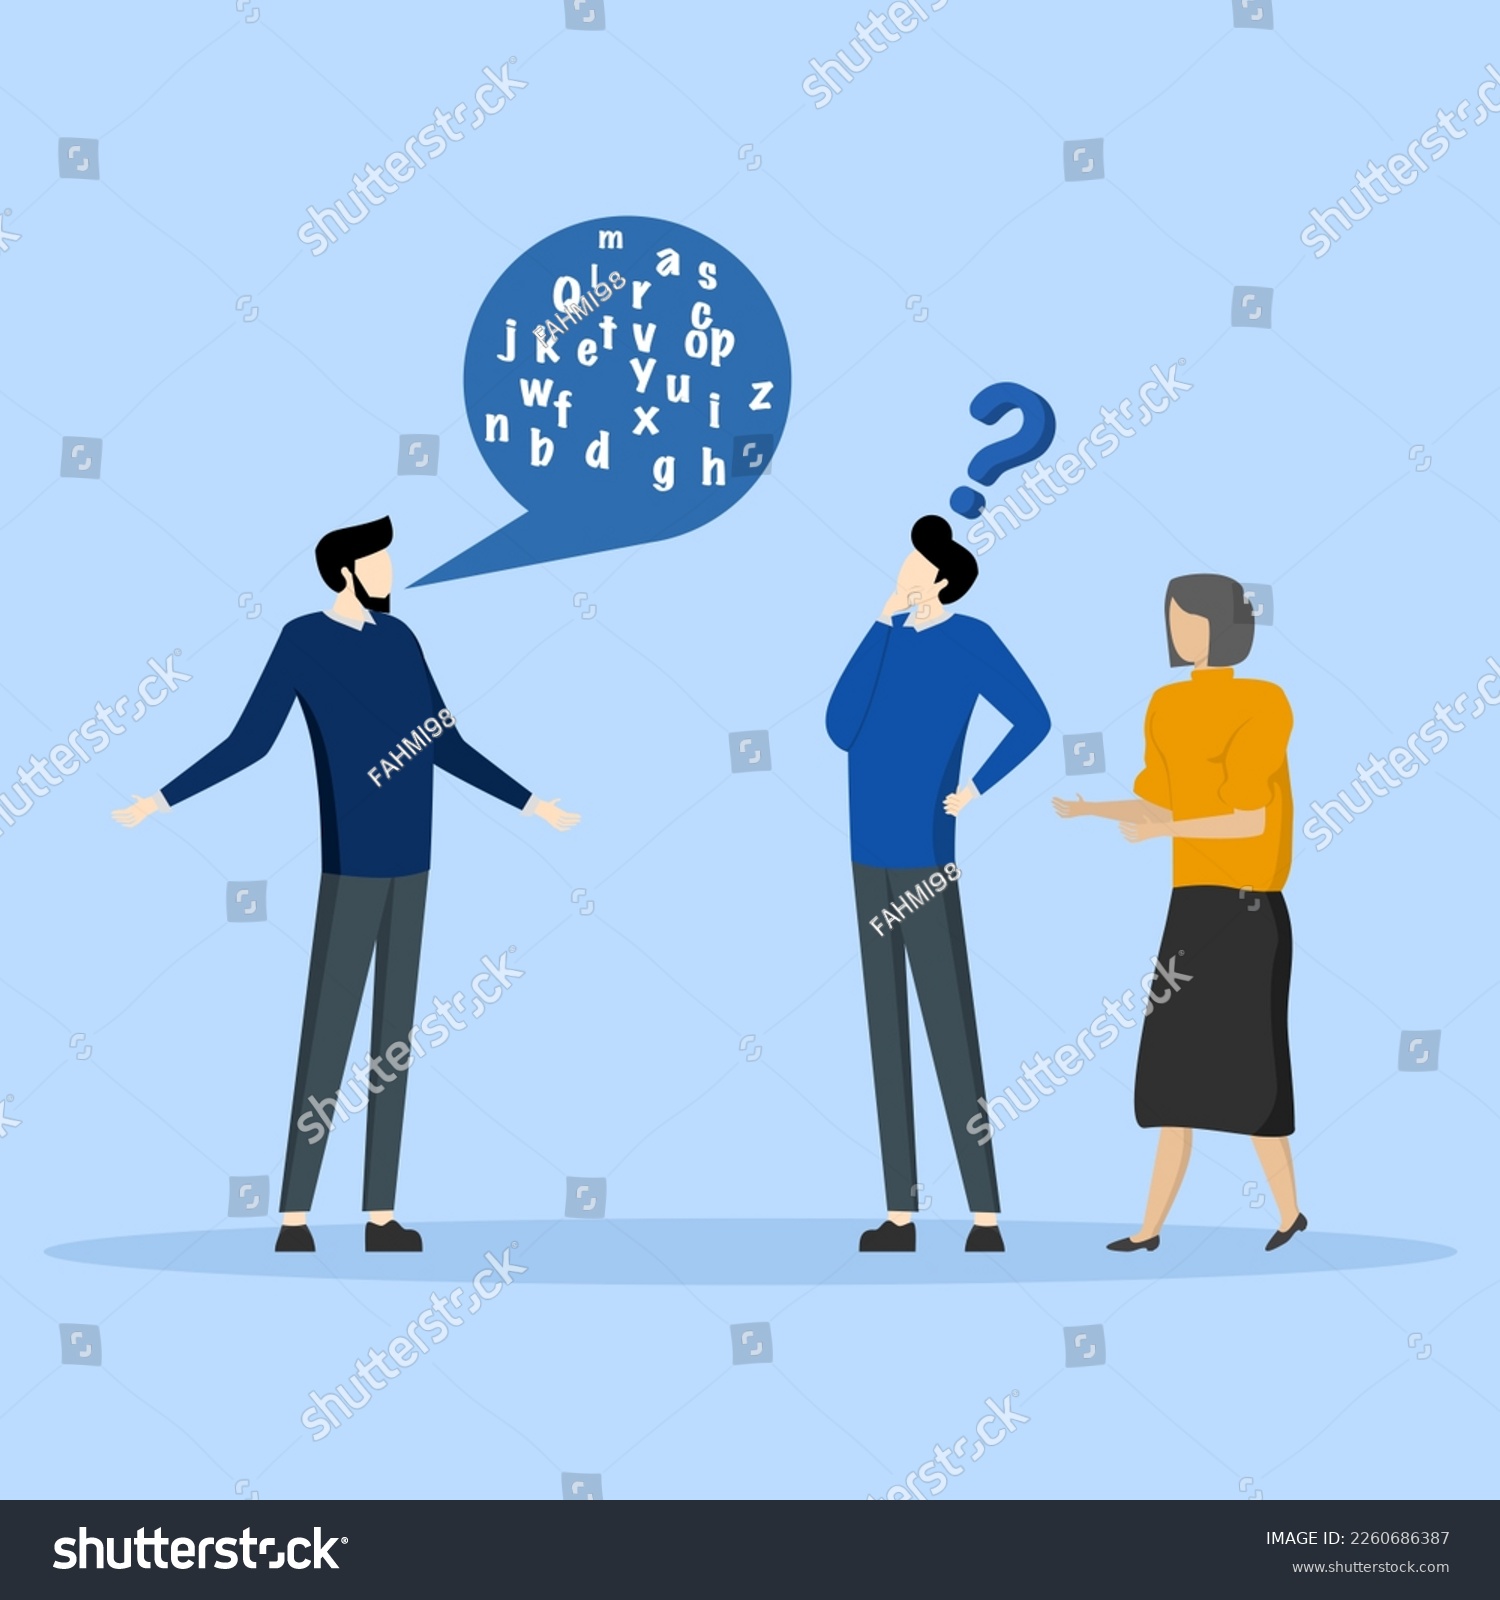 SVG of Jargon, complicated conversations, hard to explain, communicate in technical words, difficult to understand language, men speak in jargon words in speech bubble dialogues that confuse people. svg